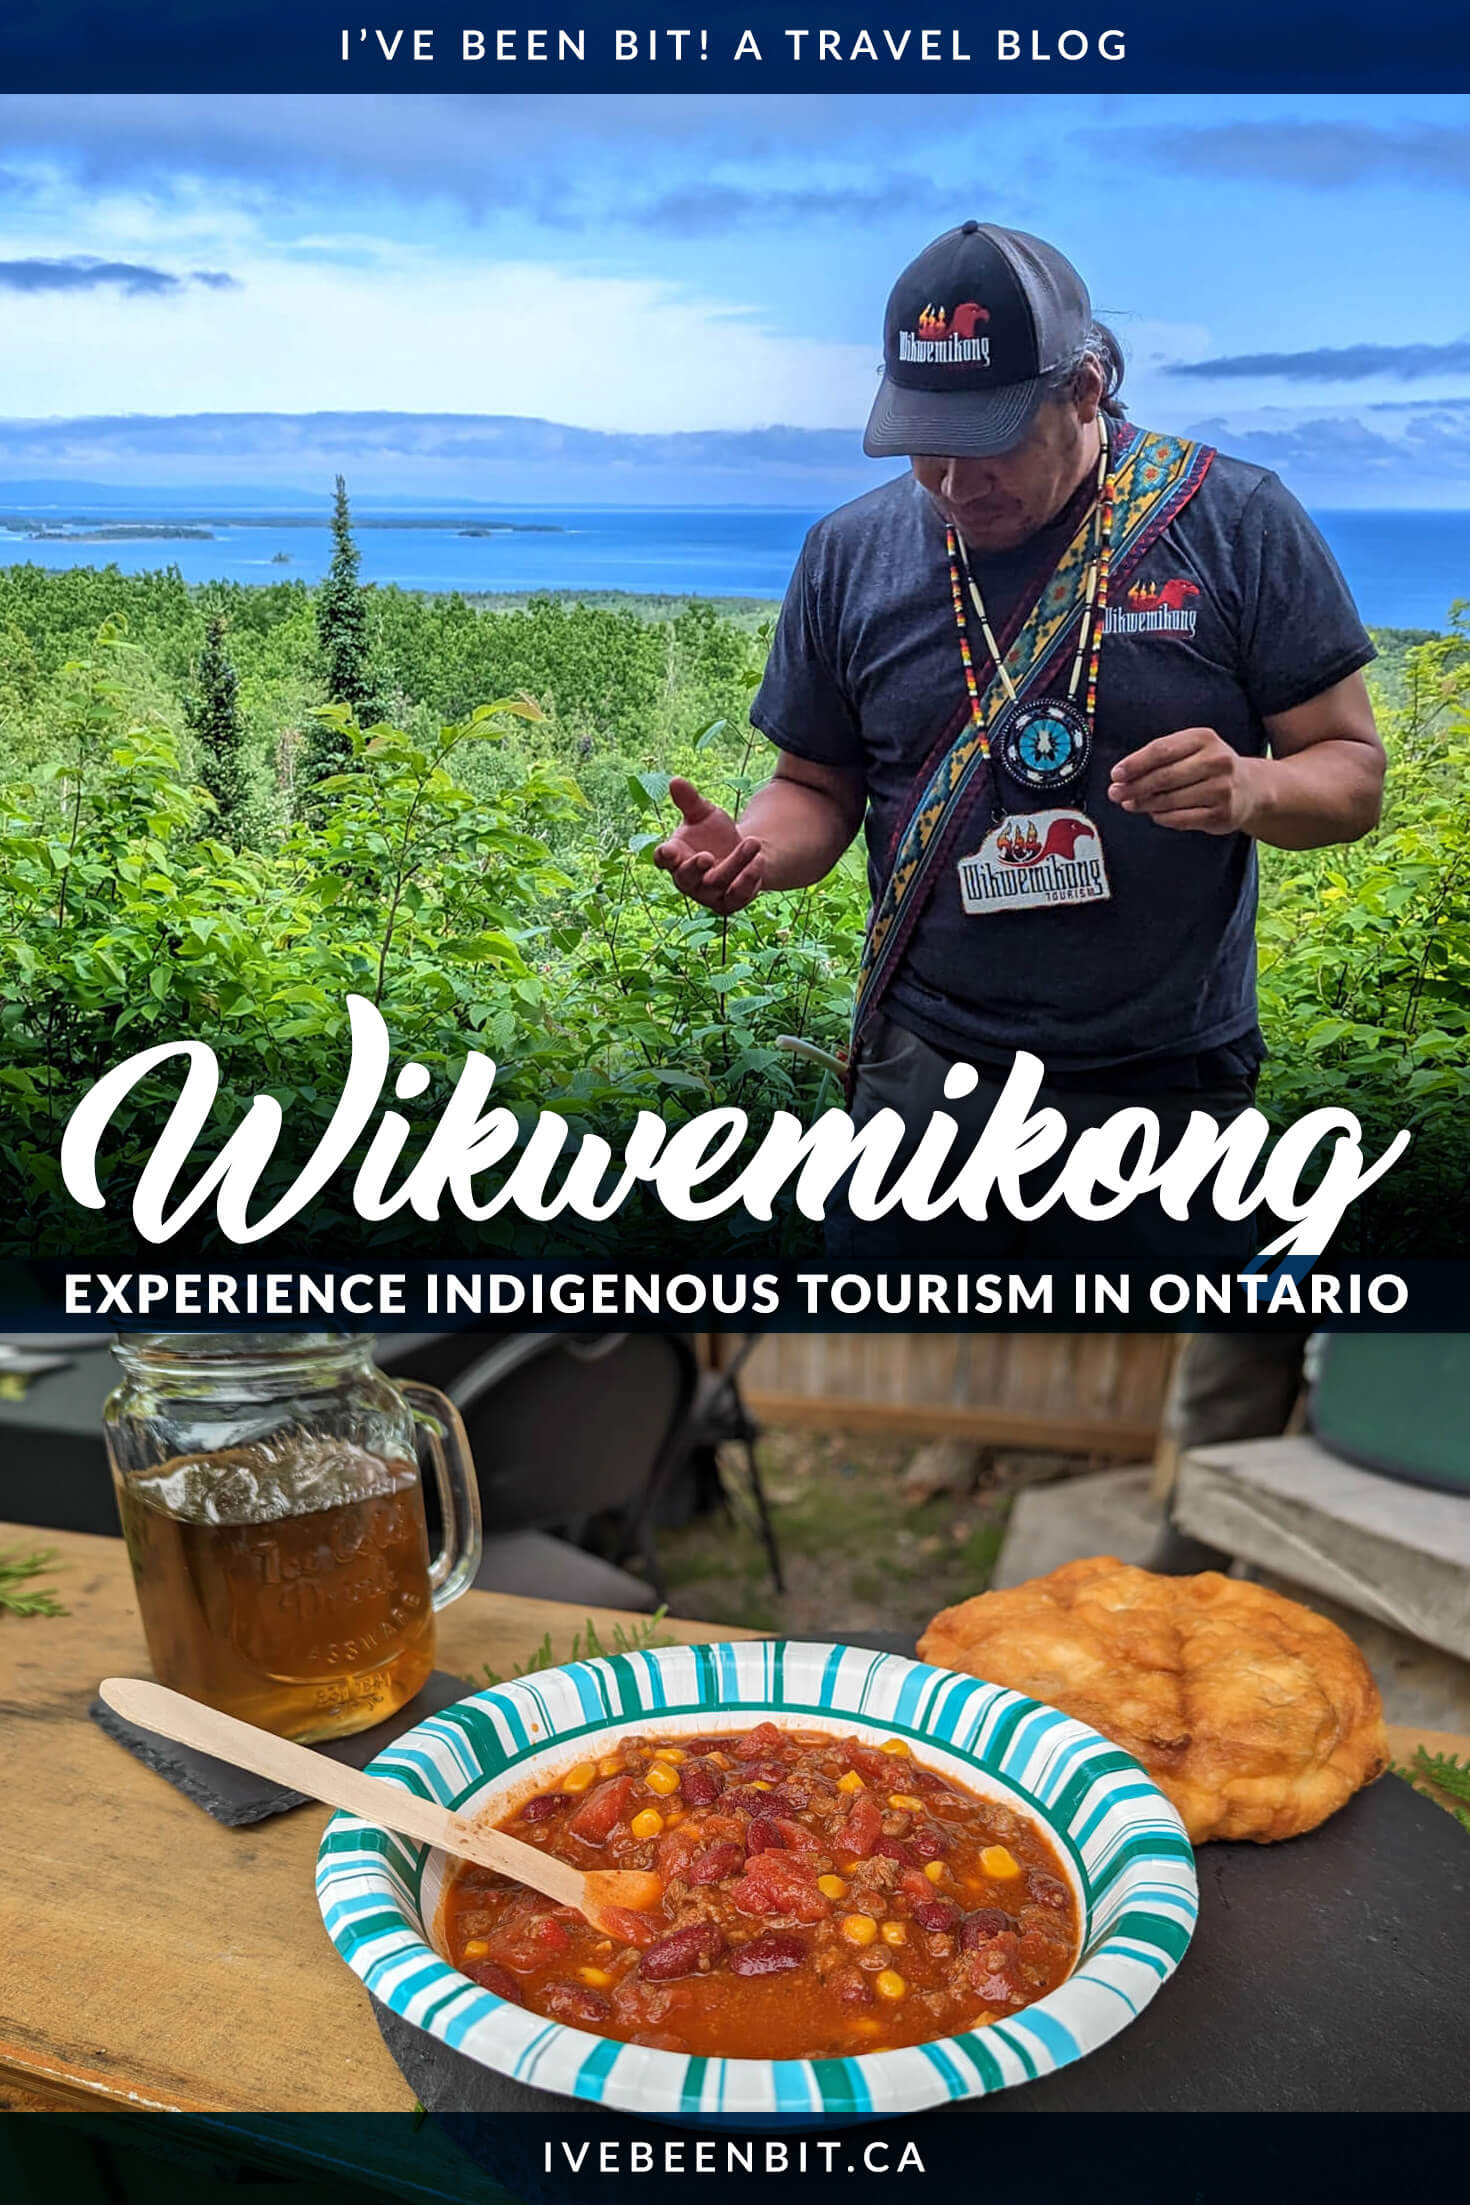 Experience the top Indigenous tourism destination in Ontario | Wikwemikong Tourism | Wiikwemkoong Unceded Territory | Indigenous Tourism Ontario | Indigenous Tourism Canada | Indigenous Ontario | Indigenous Canada | Indigenous Experiences | Odawa Mnis | Manitoulin Island | Things to Do on Manitoulin Island | Things to Do in Ontario Canada | Manitoulin Island Road Trip | Ontario Road Trip | #Travel #Canada #Ontario #Indigenous | IveBeenBit.ca